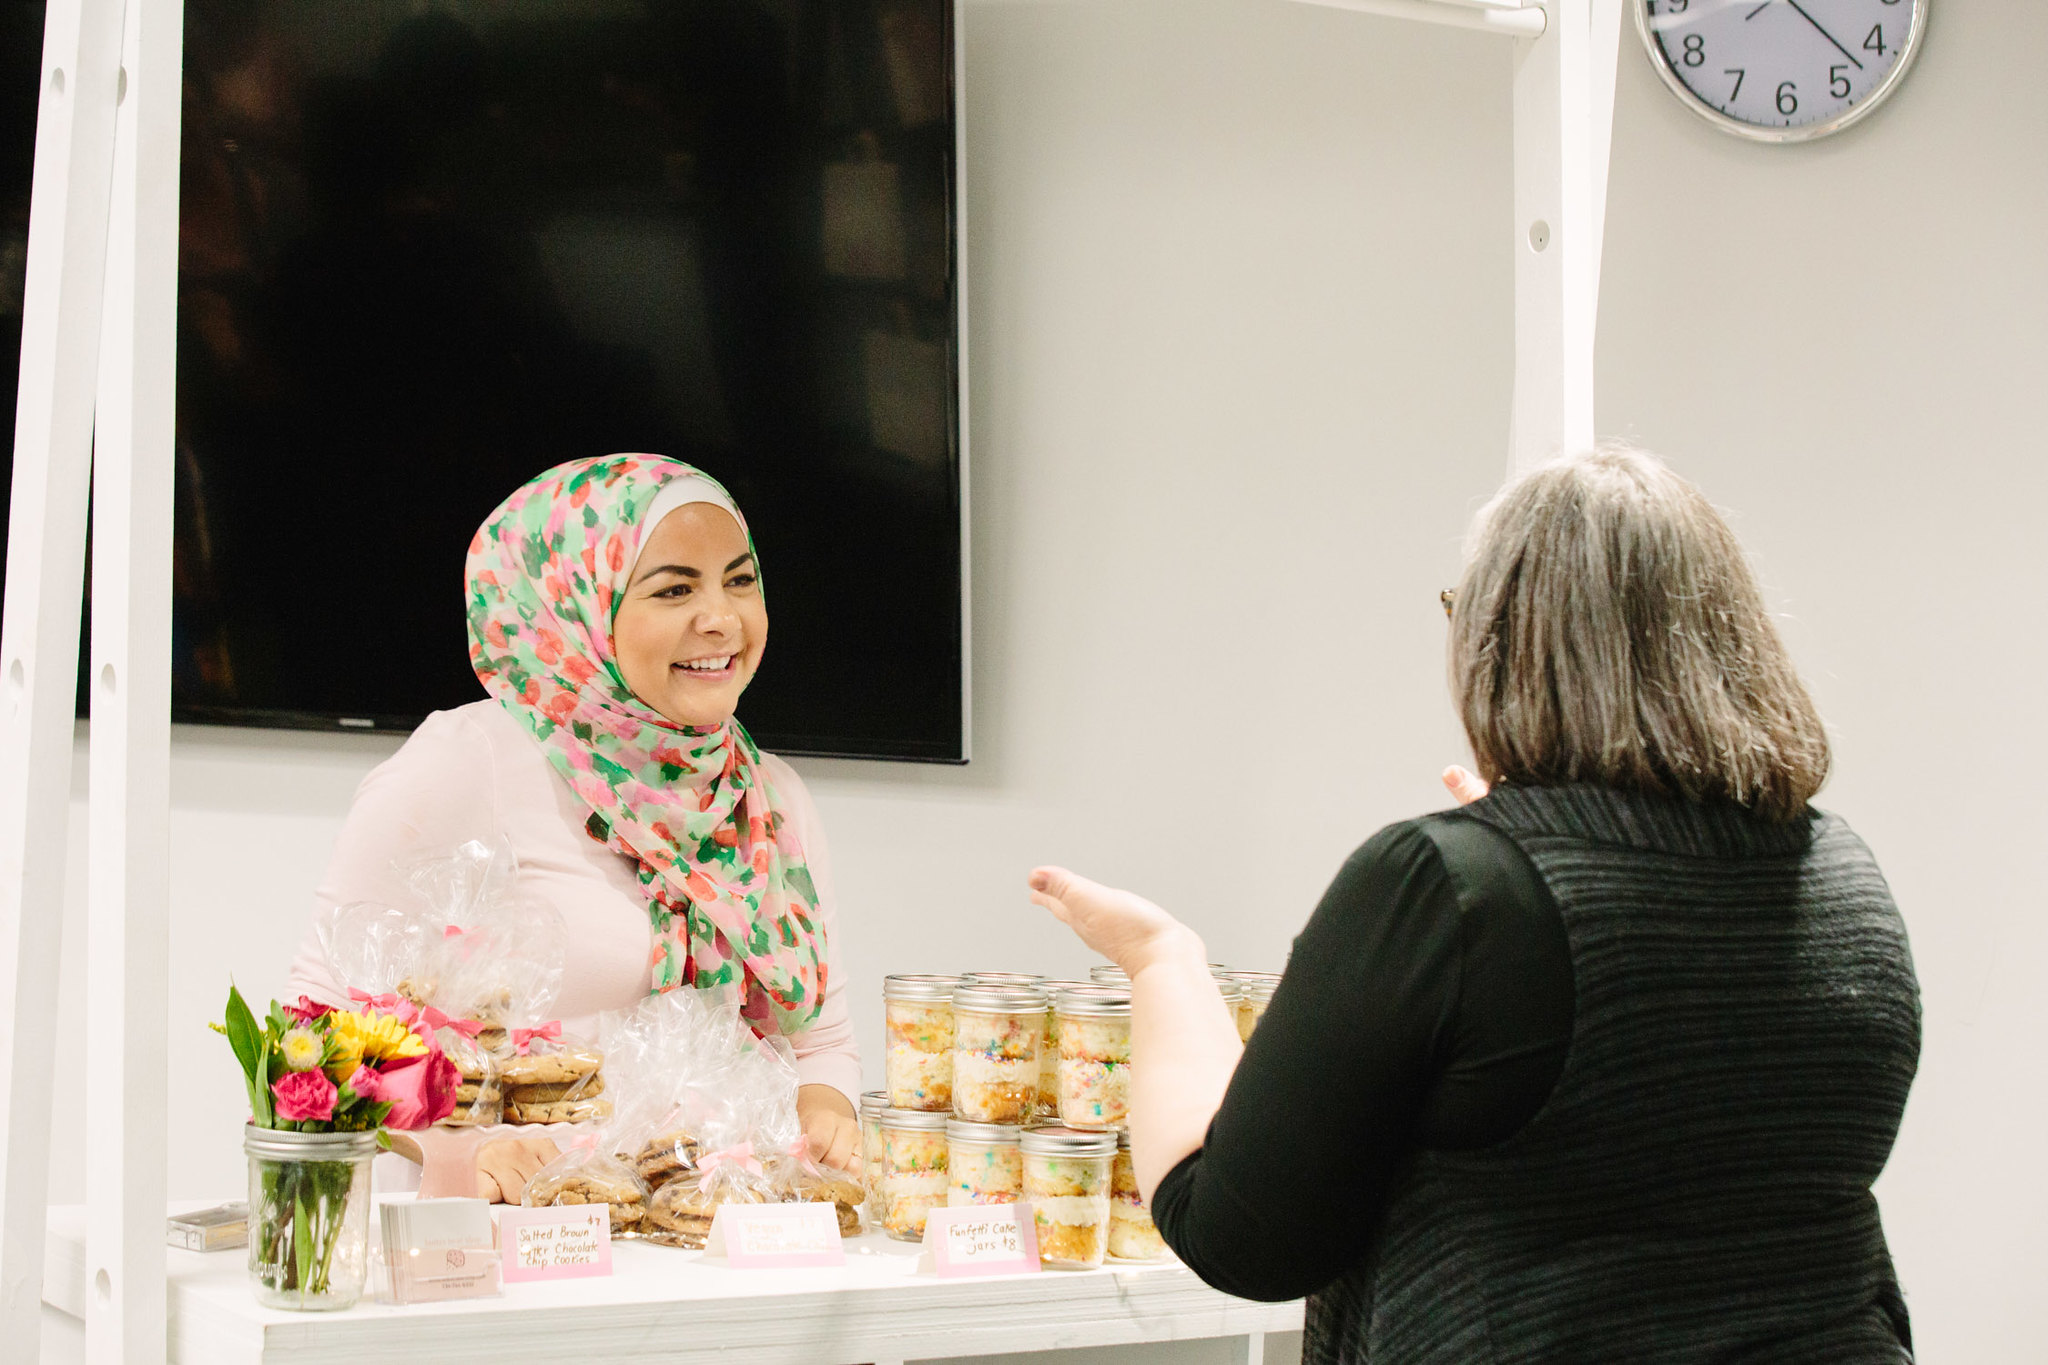 A woman speaks with another woman from behind her pop-up display of desserts